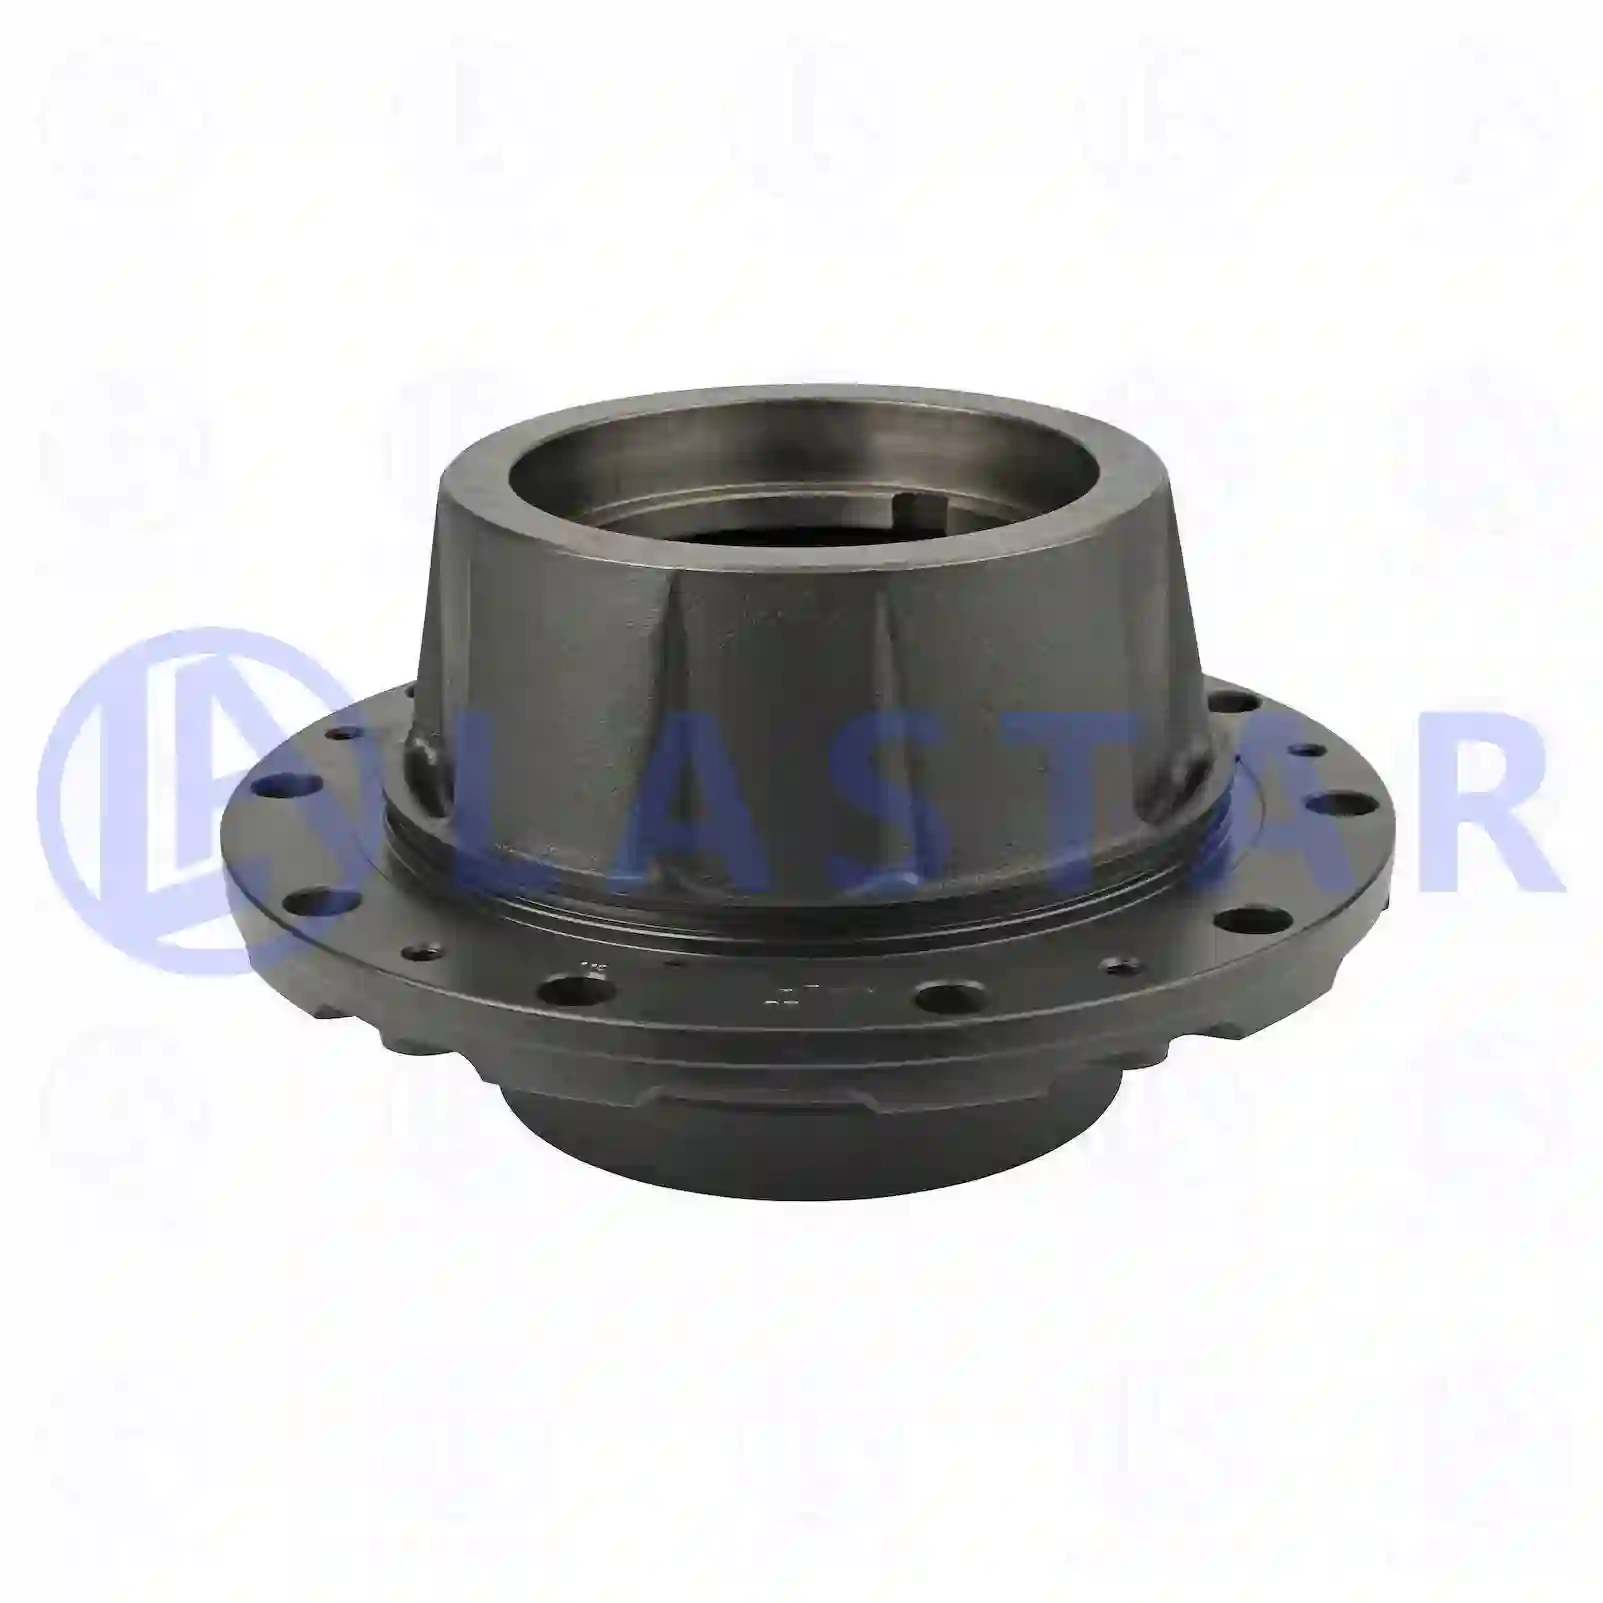 Wheel hub, without bearings, 77726310, 3463562401, , , , , ||  77726310 Lastar Spare Part | Truck Spare Parts, Auotomotive Spare Parts Wheel hub, without bearings, 77726310, 3463562401, , , , , ||  77726310 Lastar Spare Part | Truck Spare Parts, Auotomotive Spare Parts